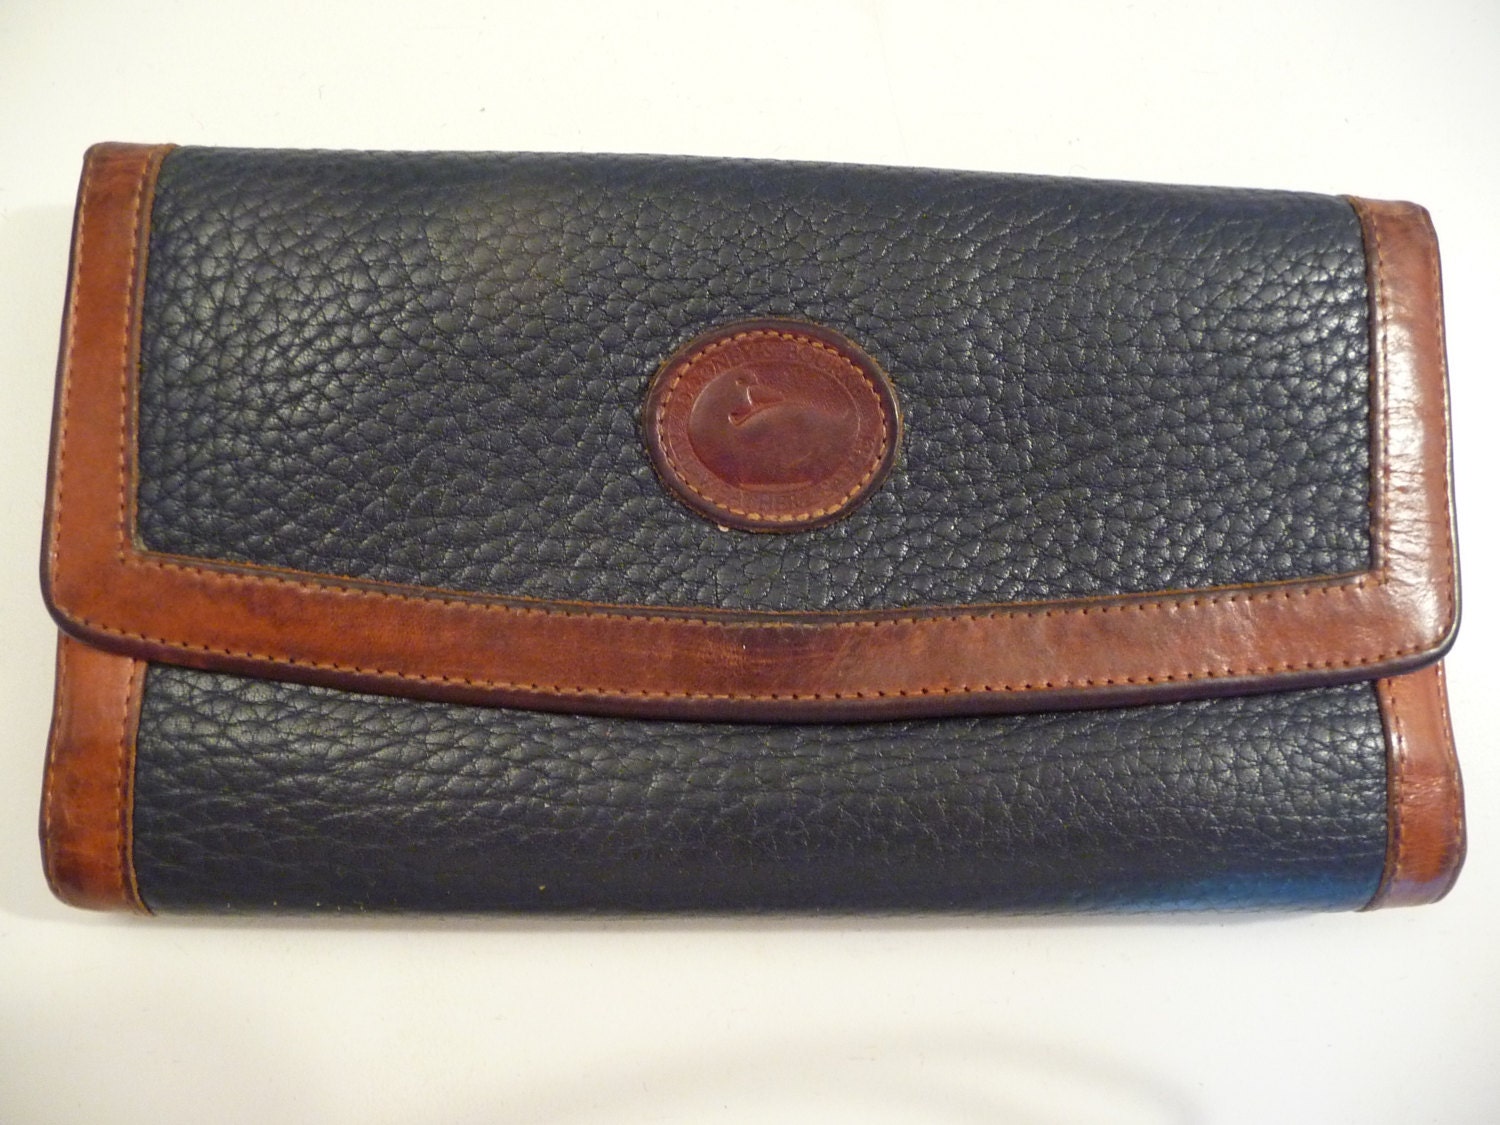 Dooney and Bourke Leather Wallet Vintage Authentic Dooney and